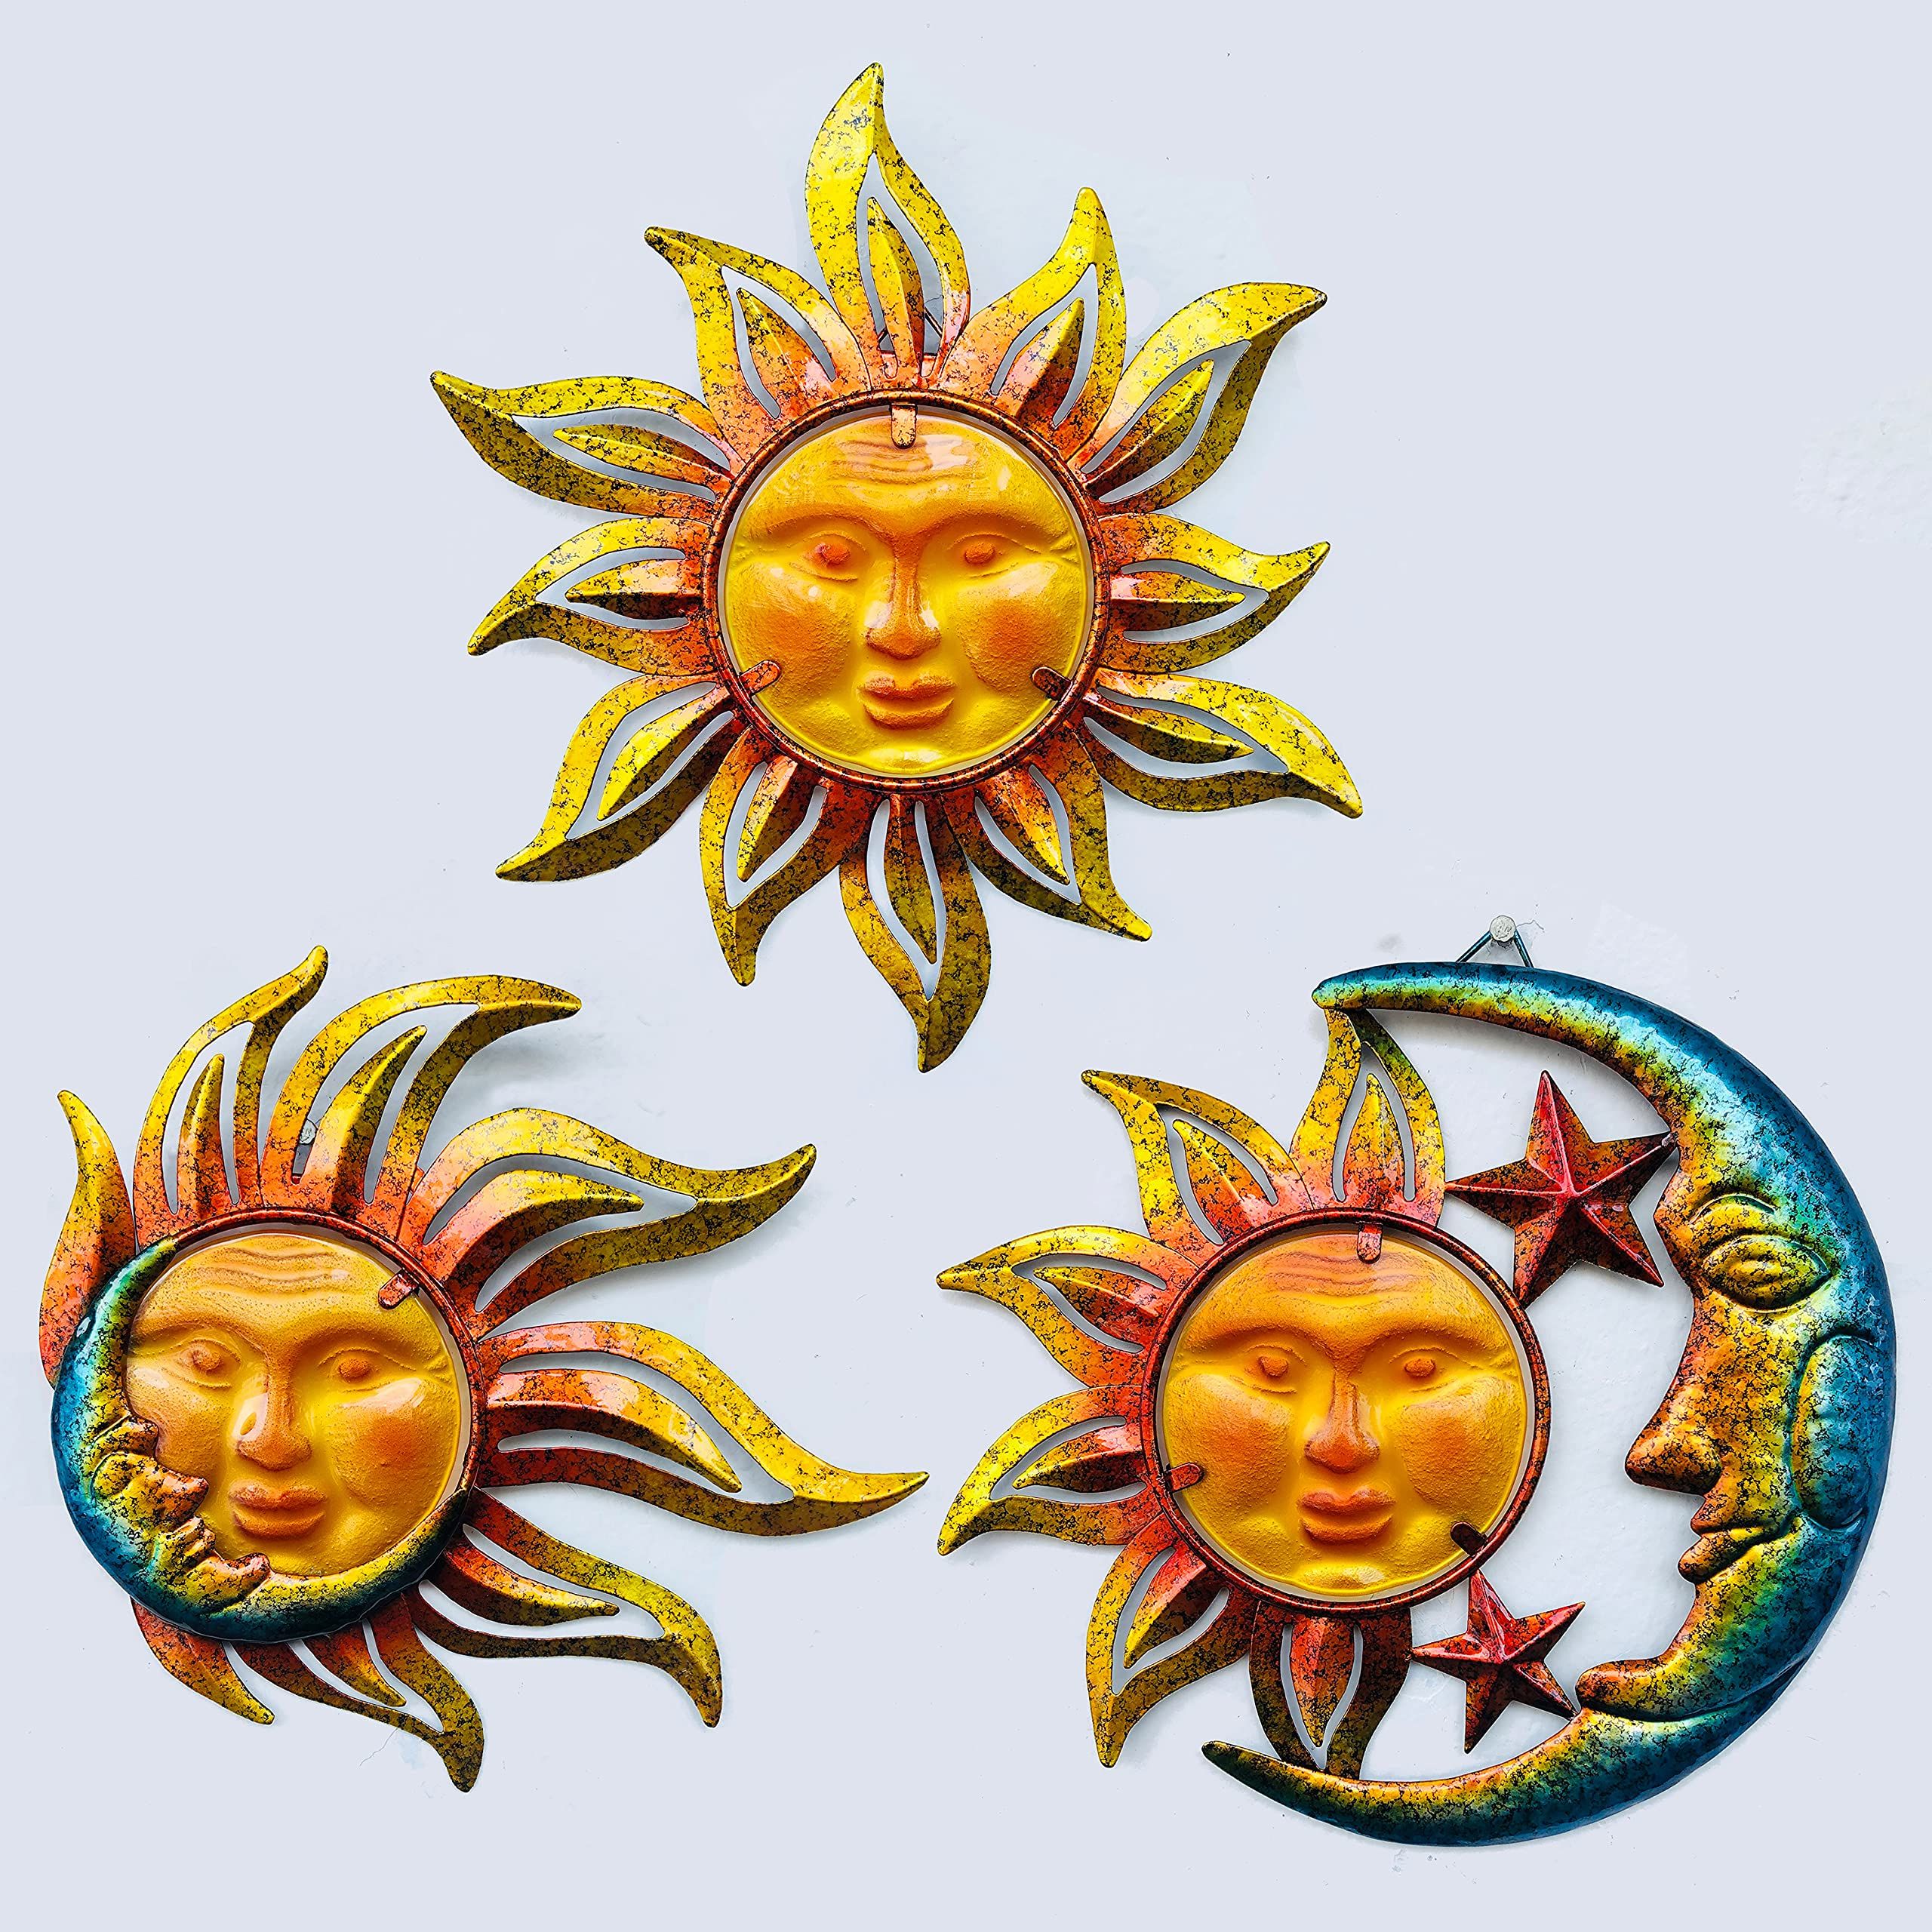 Metal & Glass Hanging Wall Art Within Most Popular Amazon: Bvlfook Sun Face Metal Wall Art Decor Outdoor Indoor, Sun Moon  Star, Metal & Glass Hanging Wall Patio Decorations For Outdoor Living Room  Bedroom Garden Porch Fence Balcony, Set Of 3, (Photo 2 of 15)